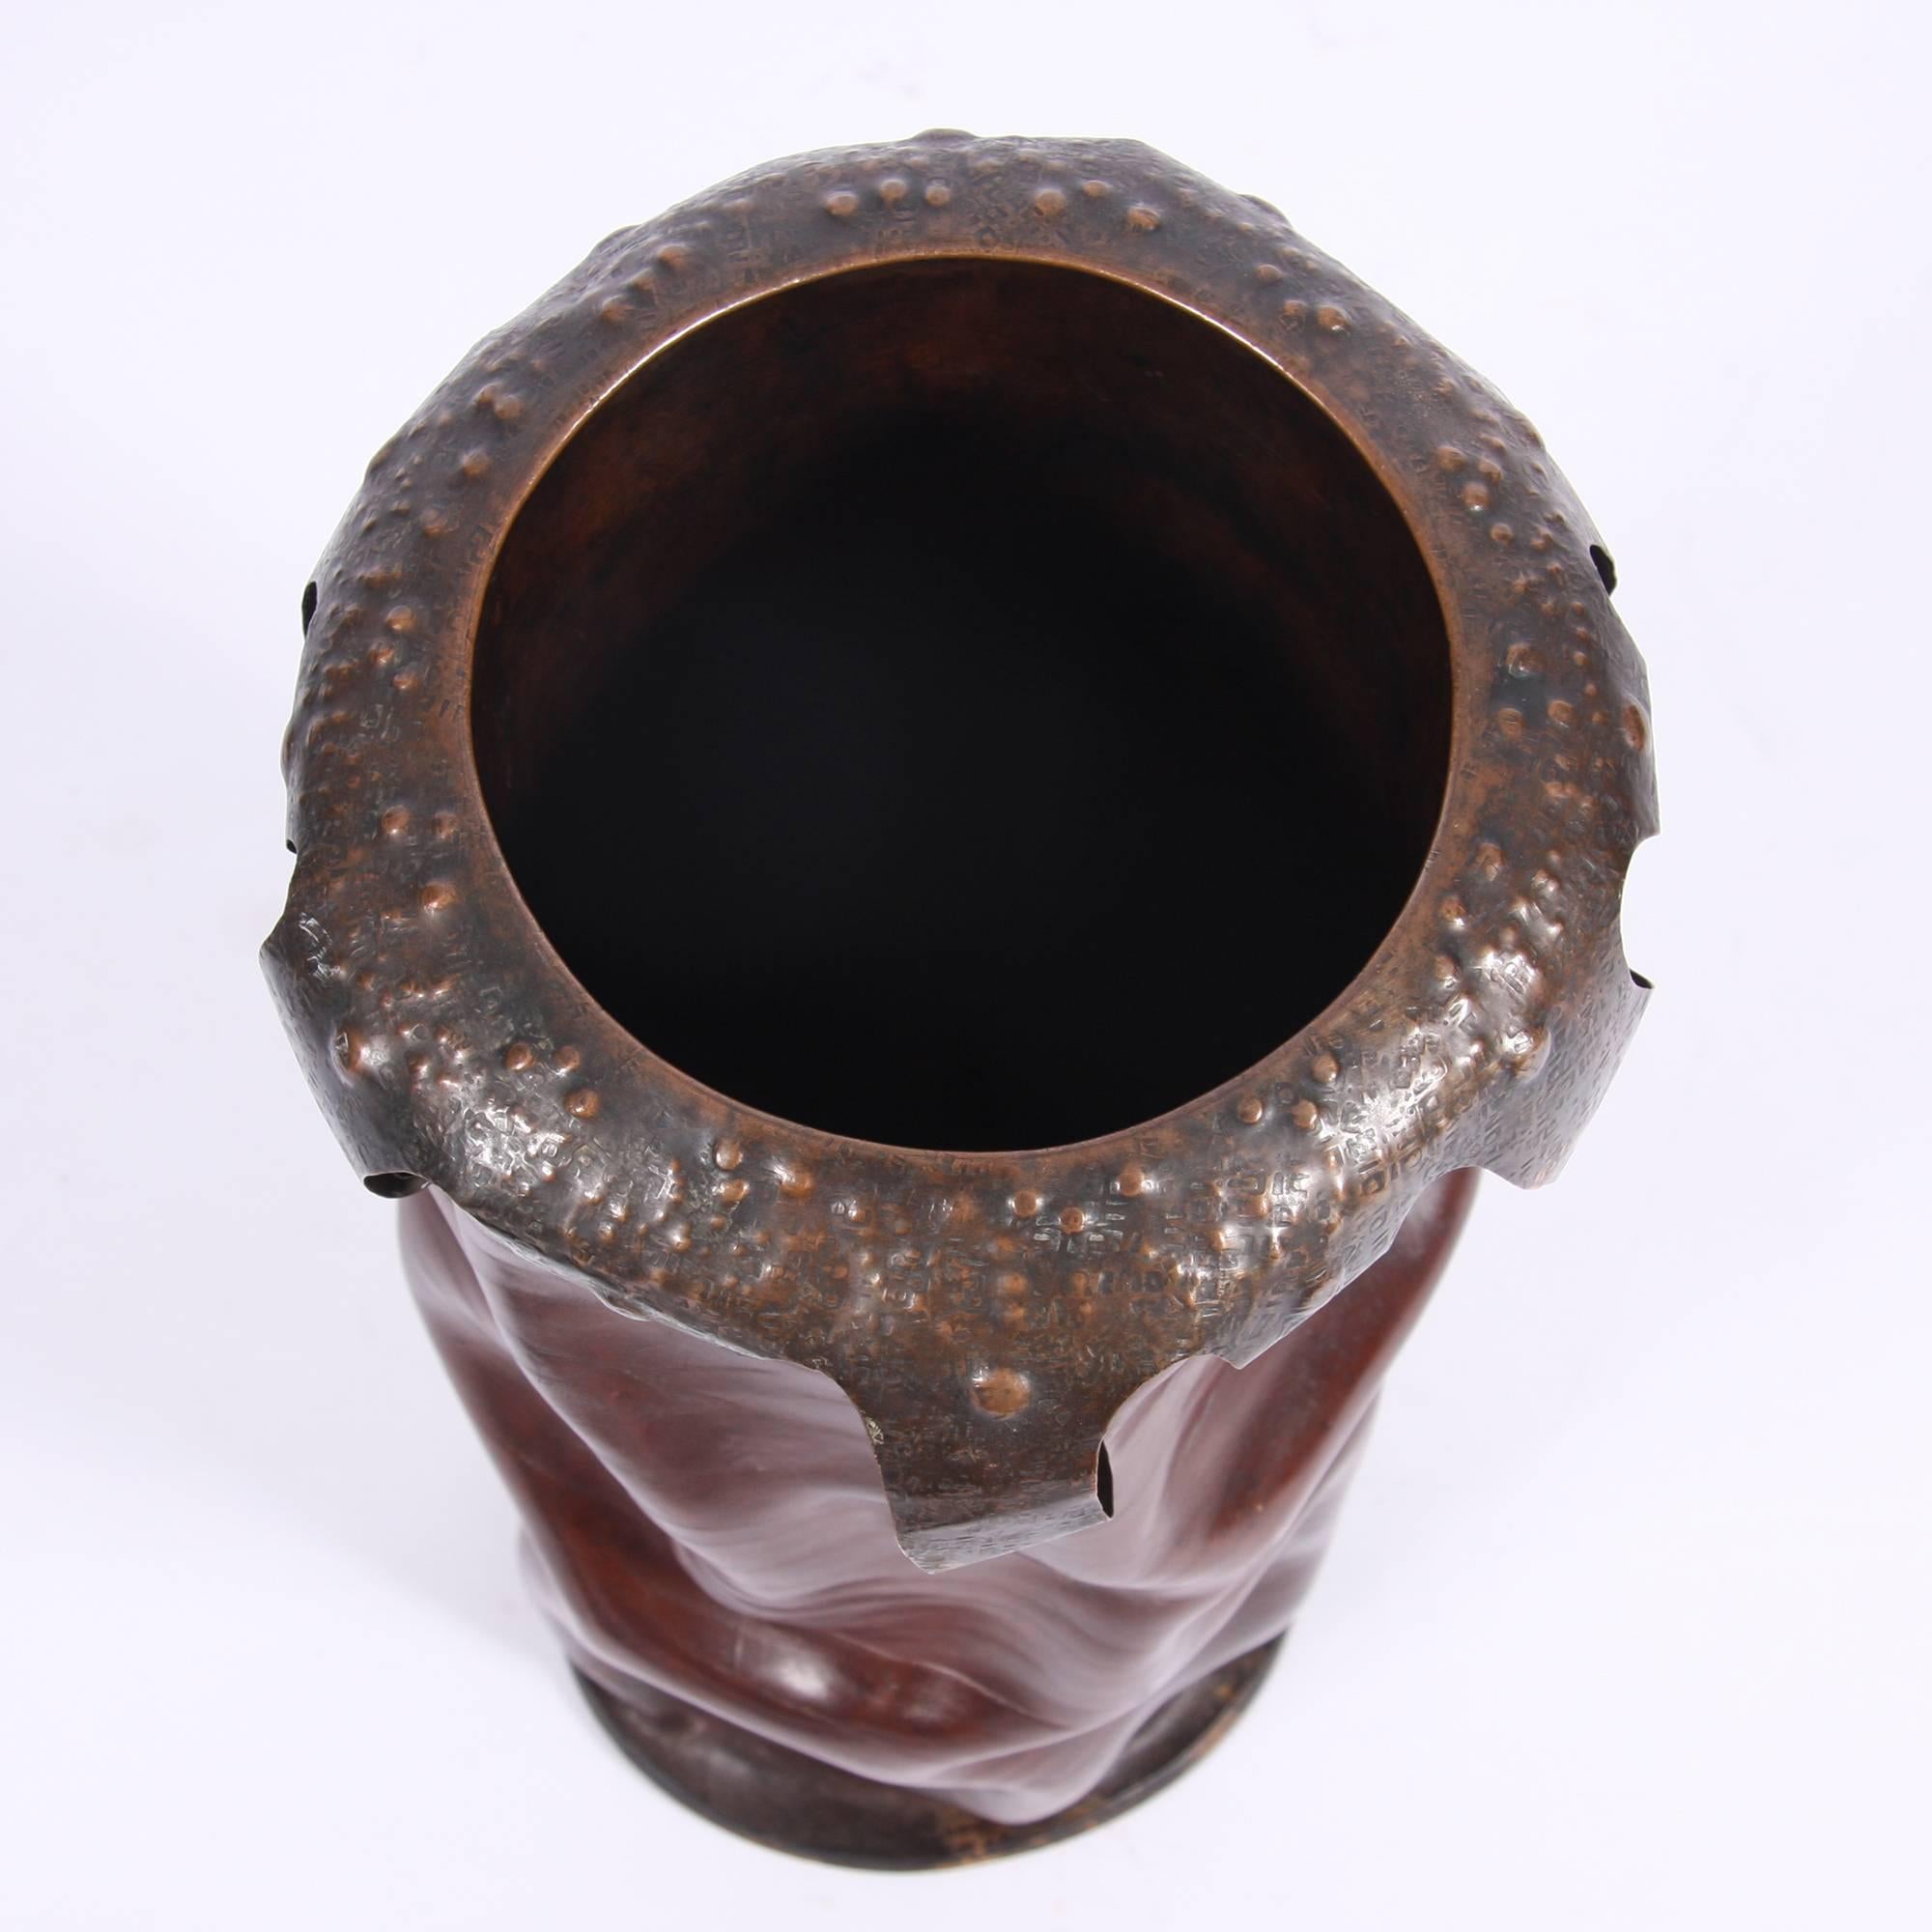 A leather and beaten copper umbrella stand, with a decorative trim. Darker leather. The surreal design makes the stand appear as if it's melting.